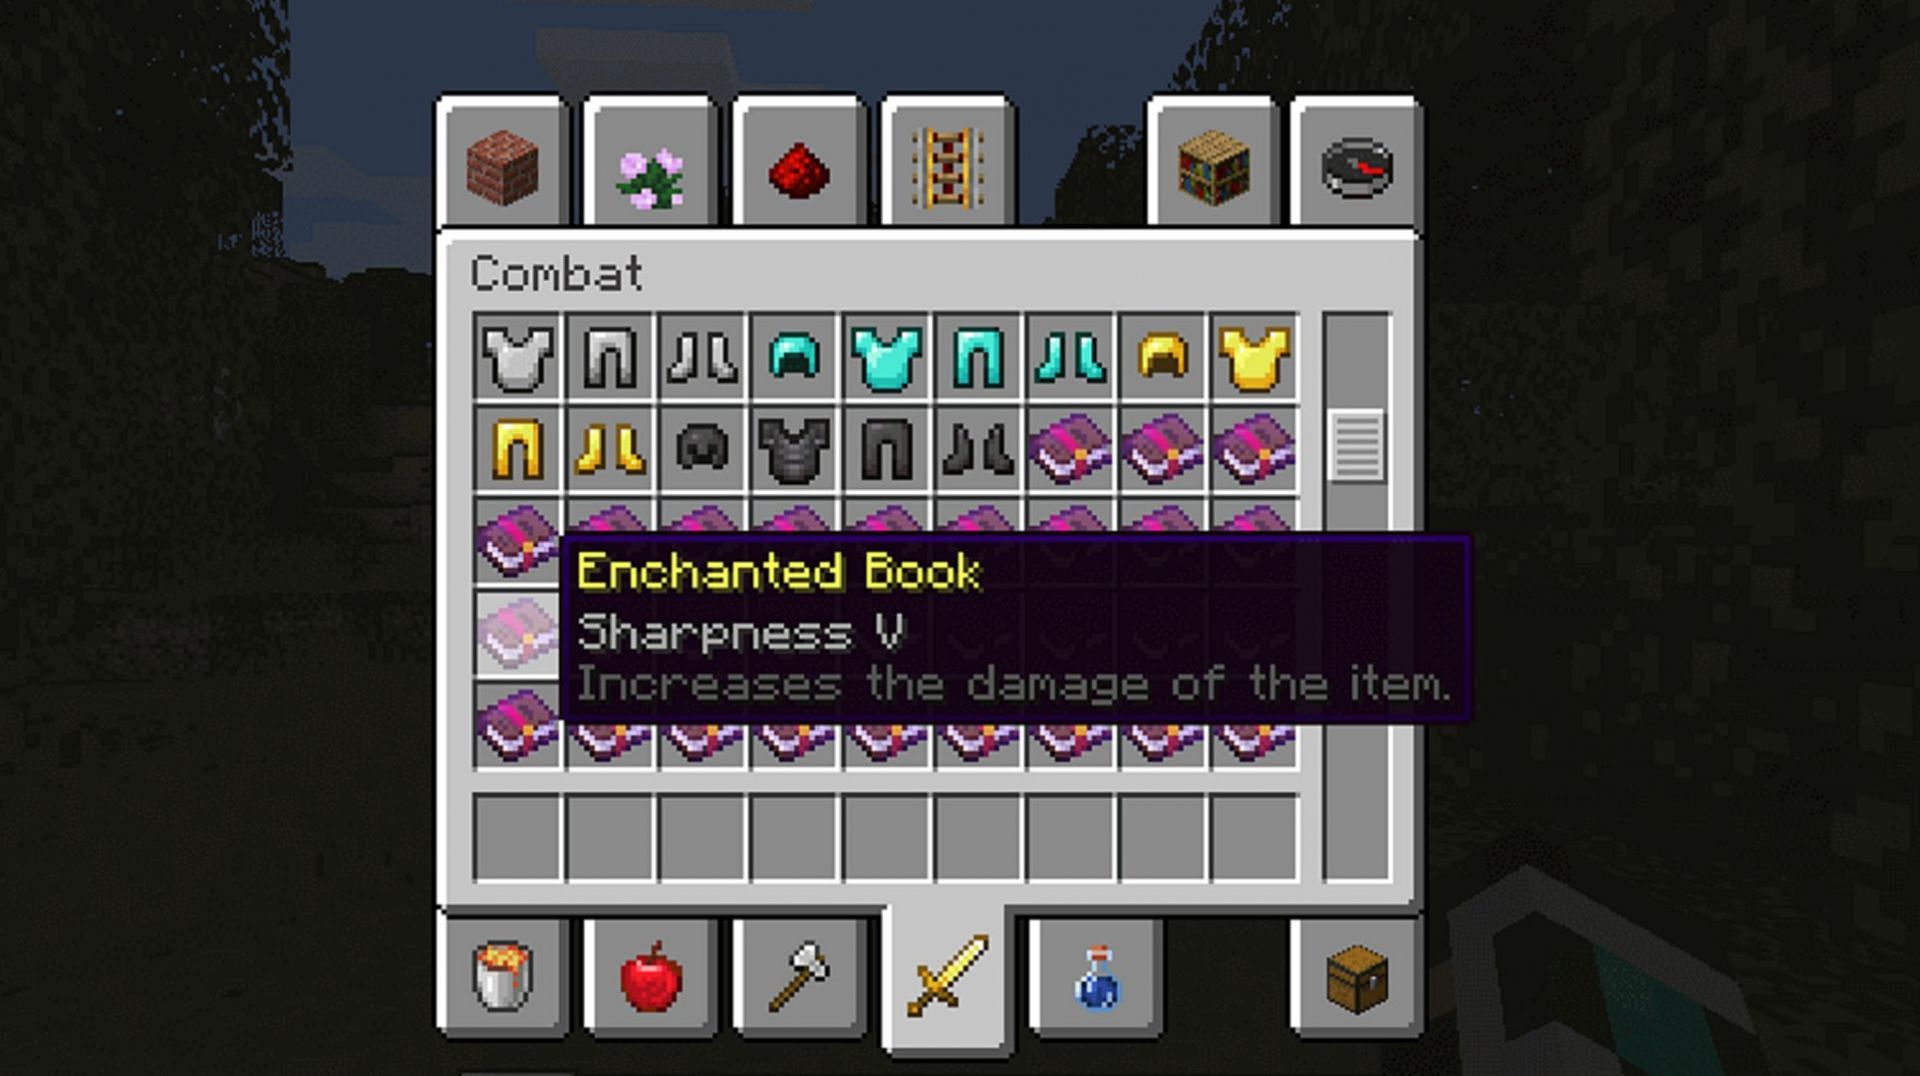 Enchantment Descriptions does as the title says, adds descriptions to explain in-game enchantments (Image via Darkhaxdev/CurseForge)